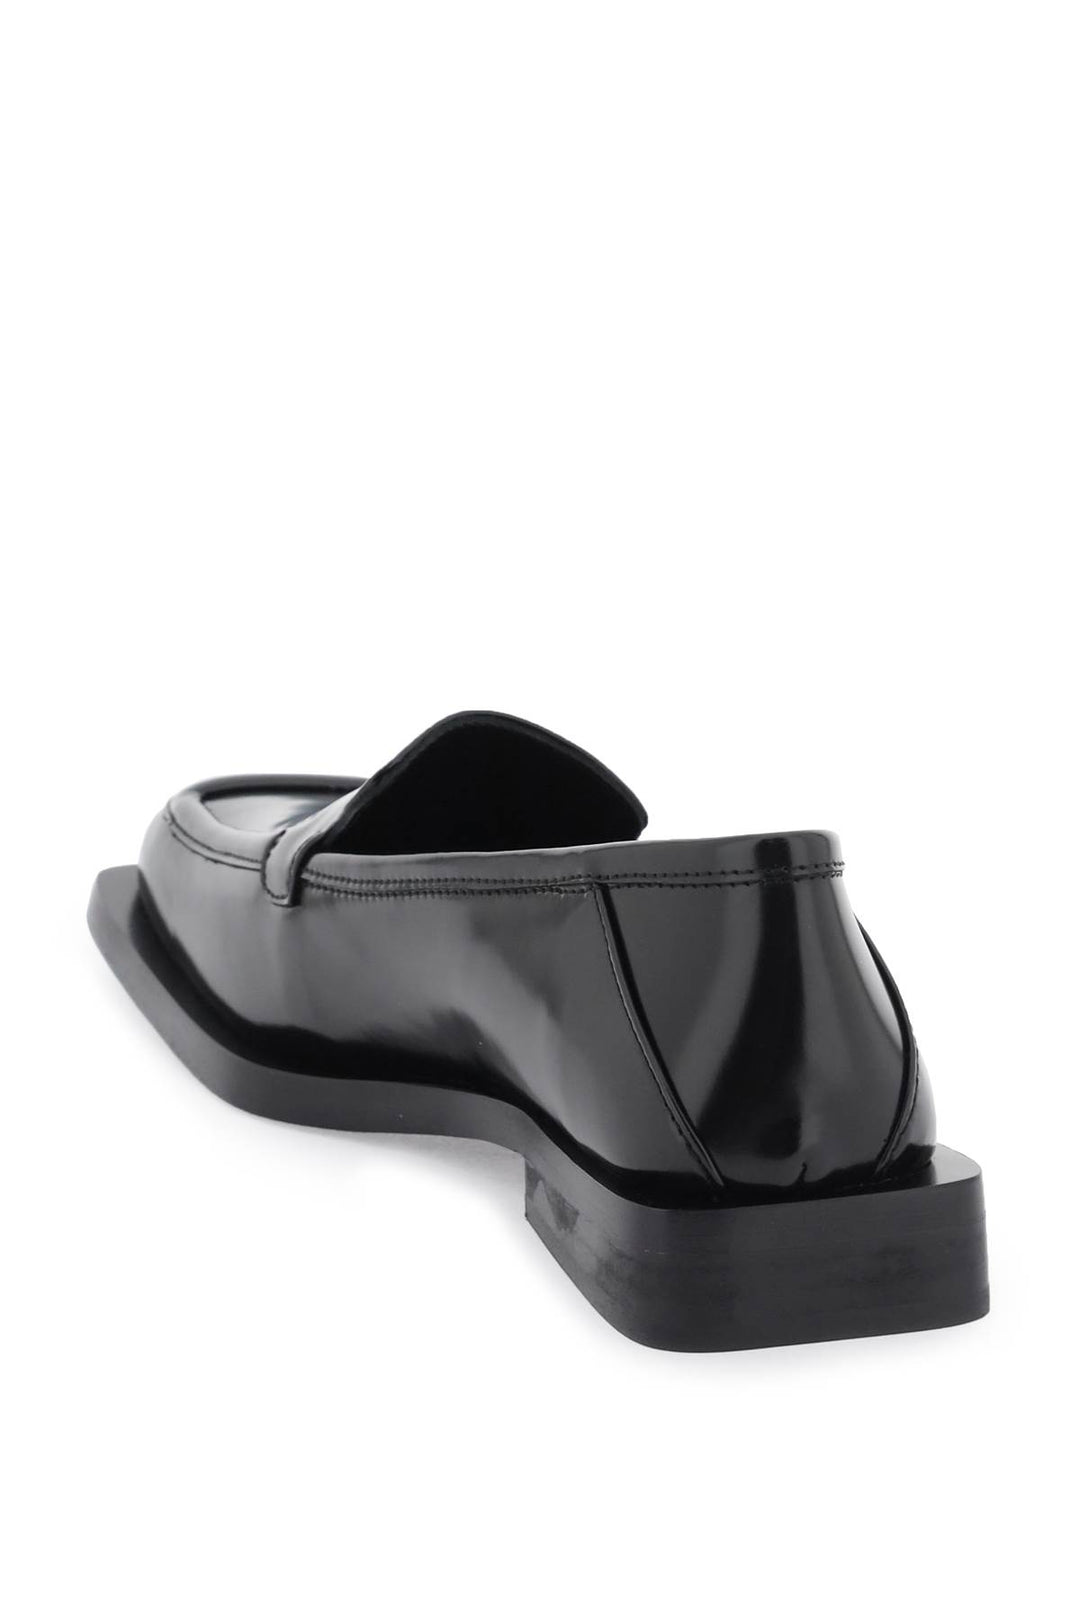 The Attico Brushed Leather 'Micol' Loafers   Black